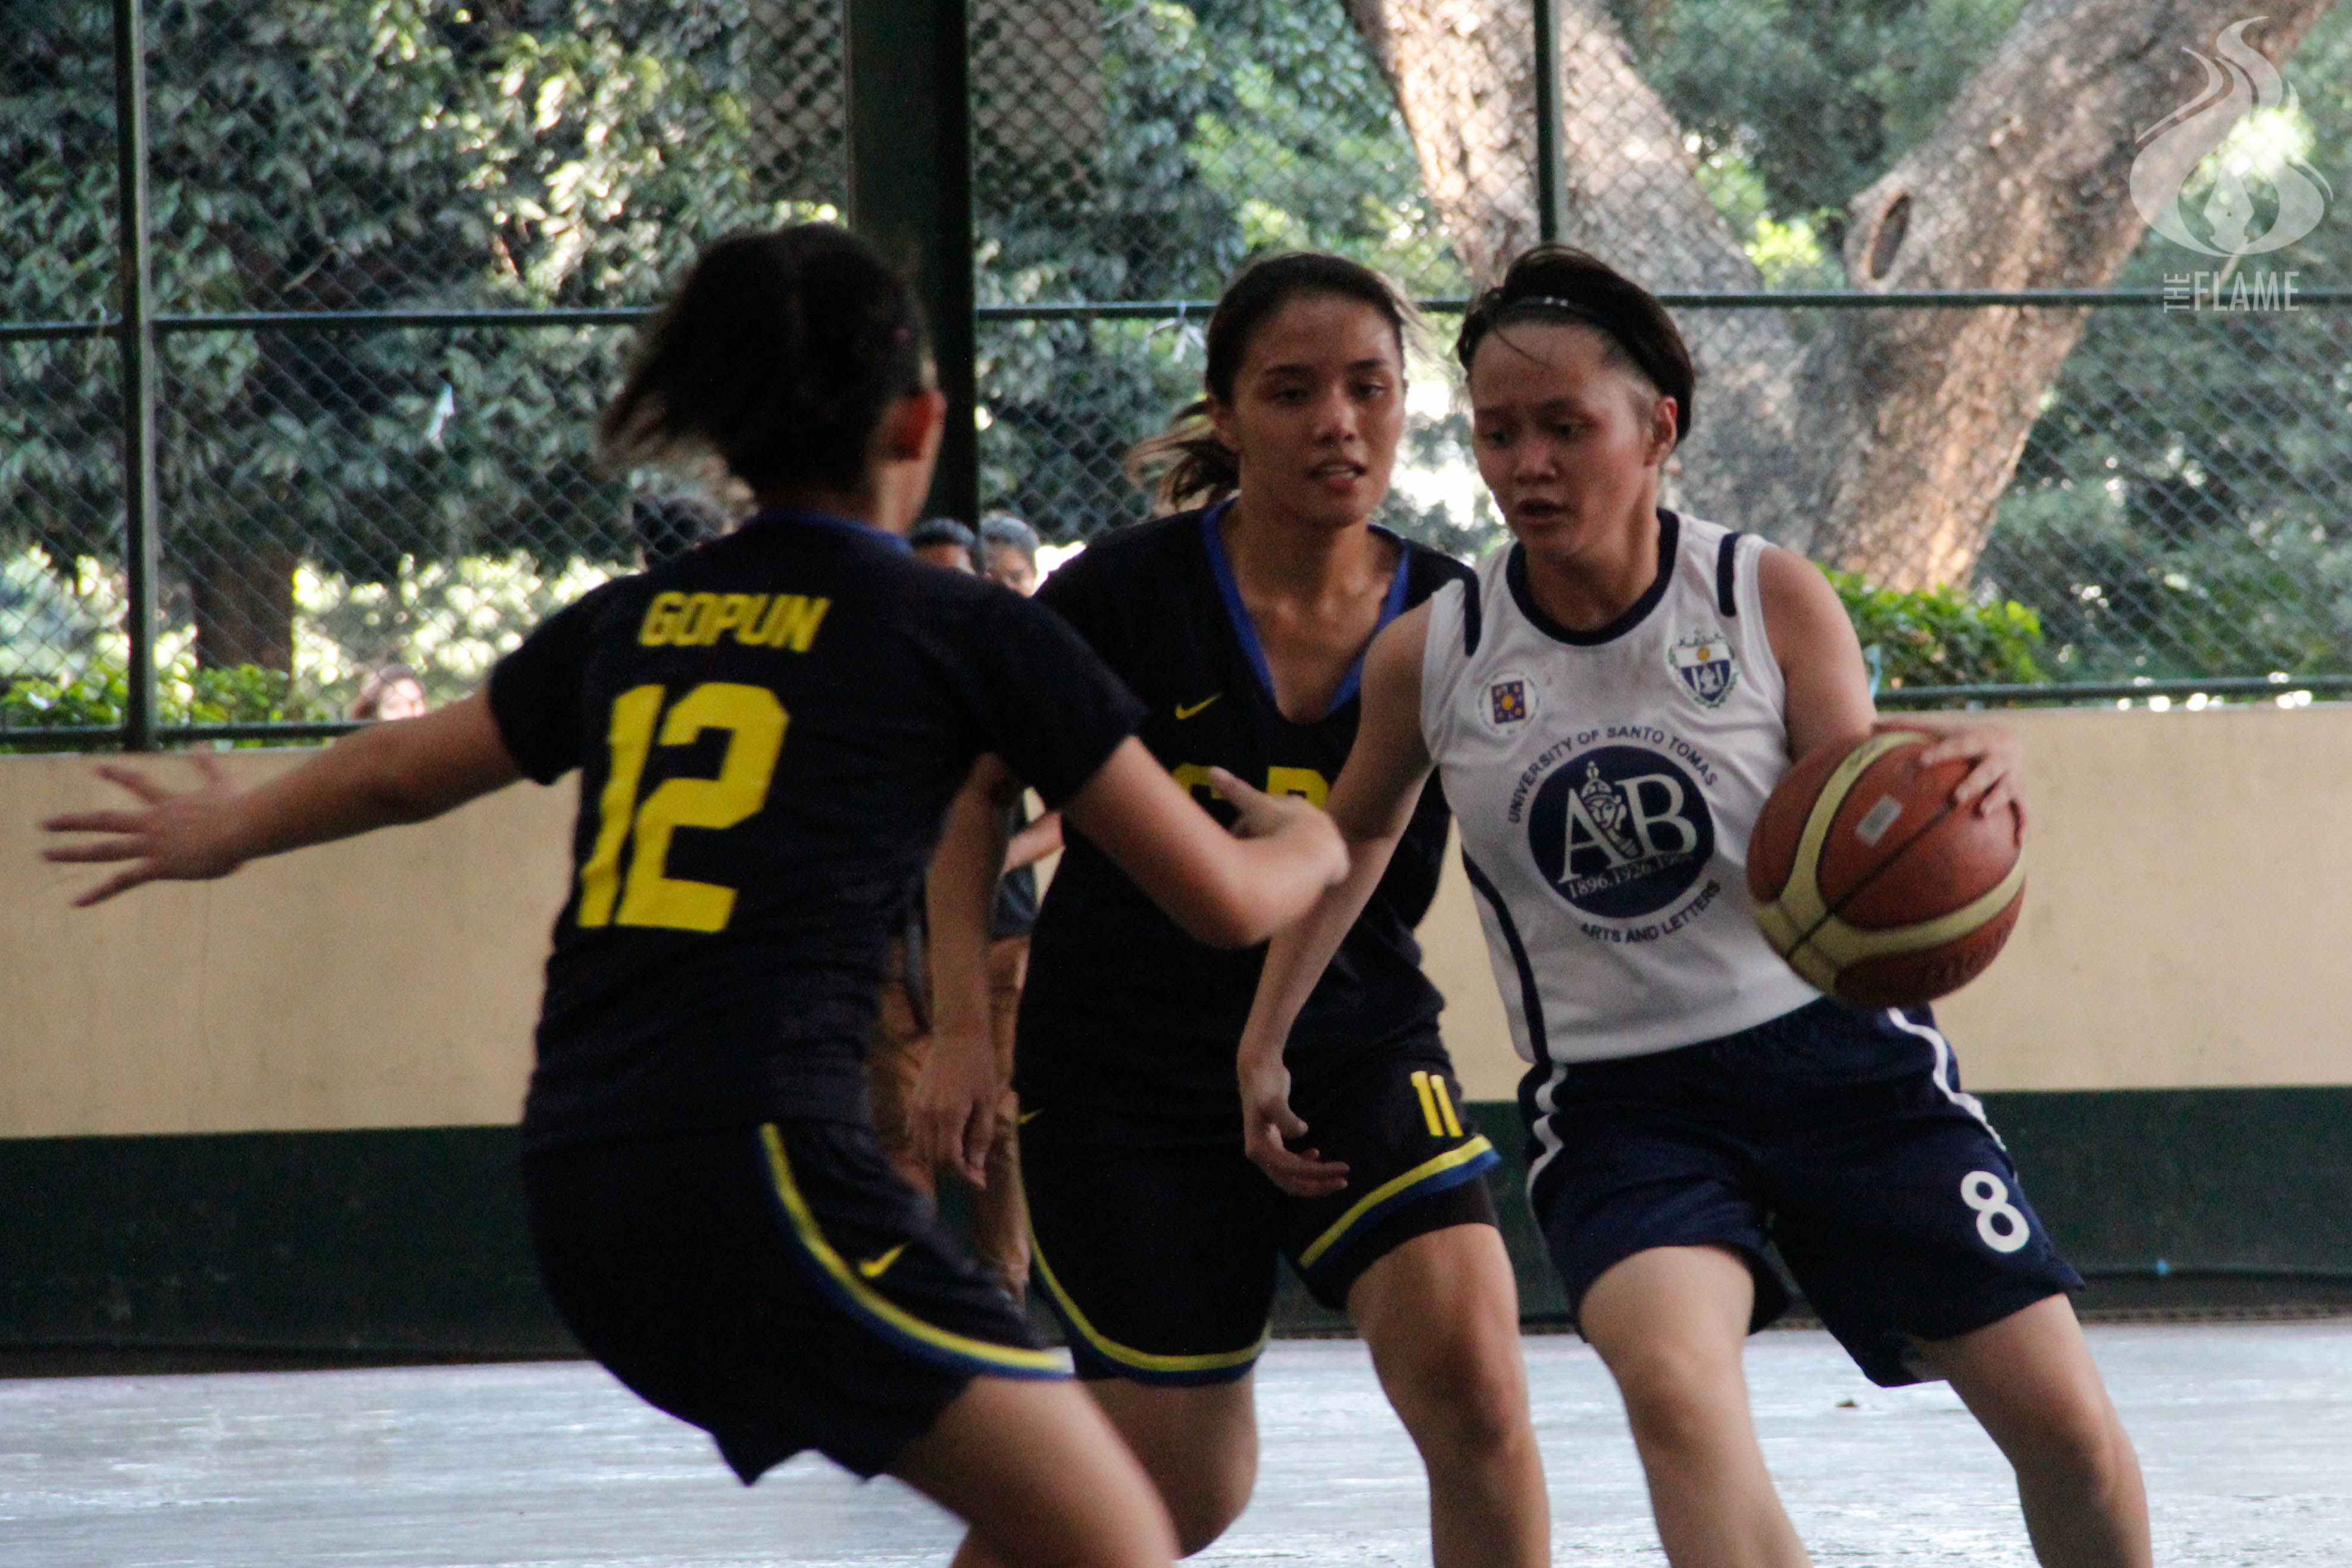 AB set to face rival IPEA in Goodwill semis